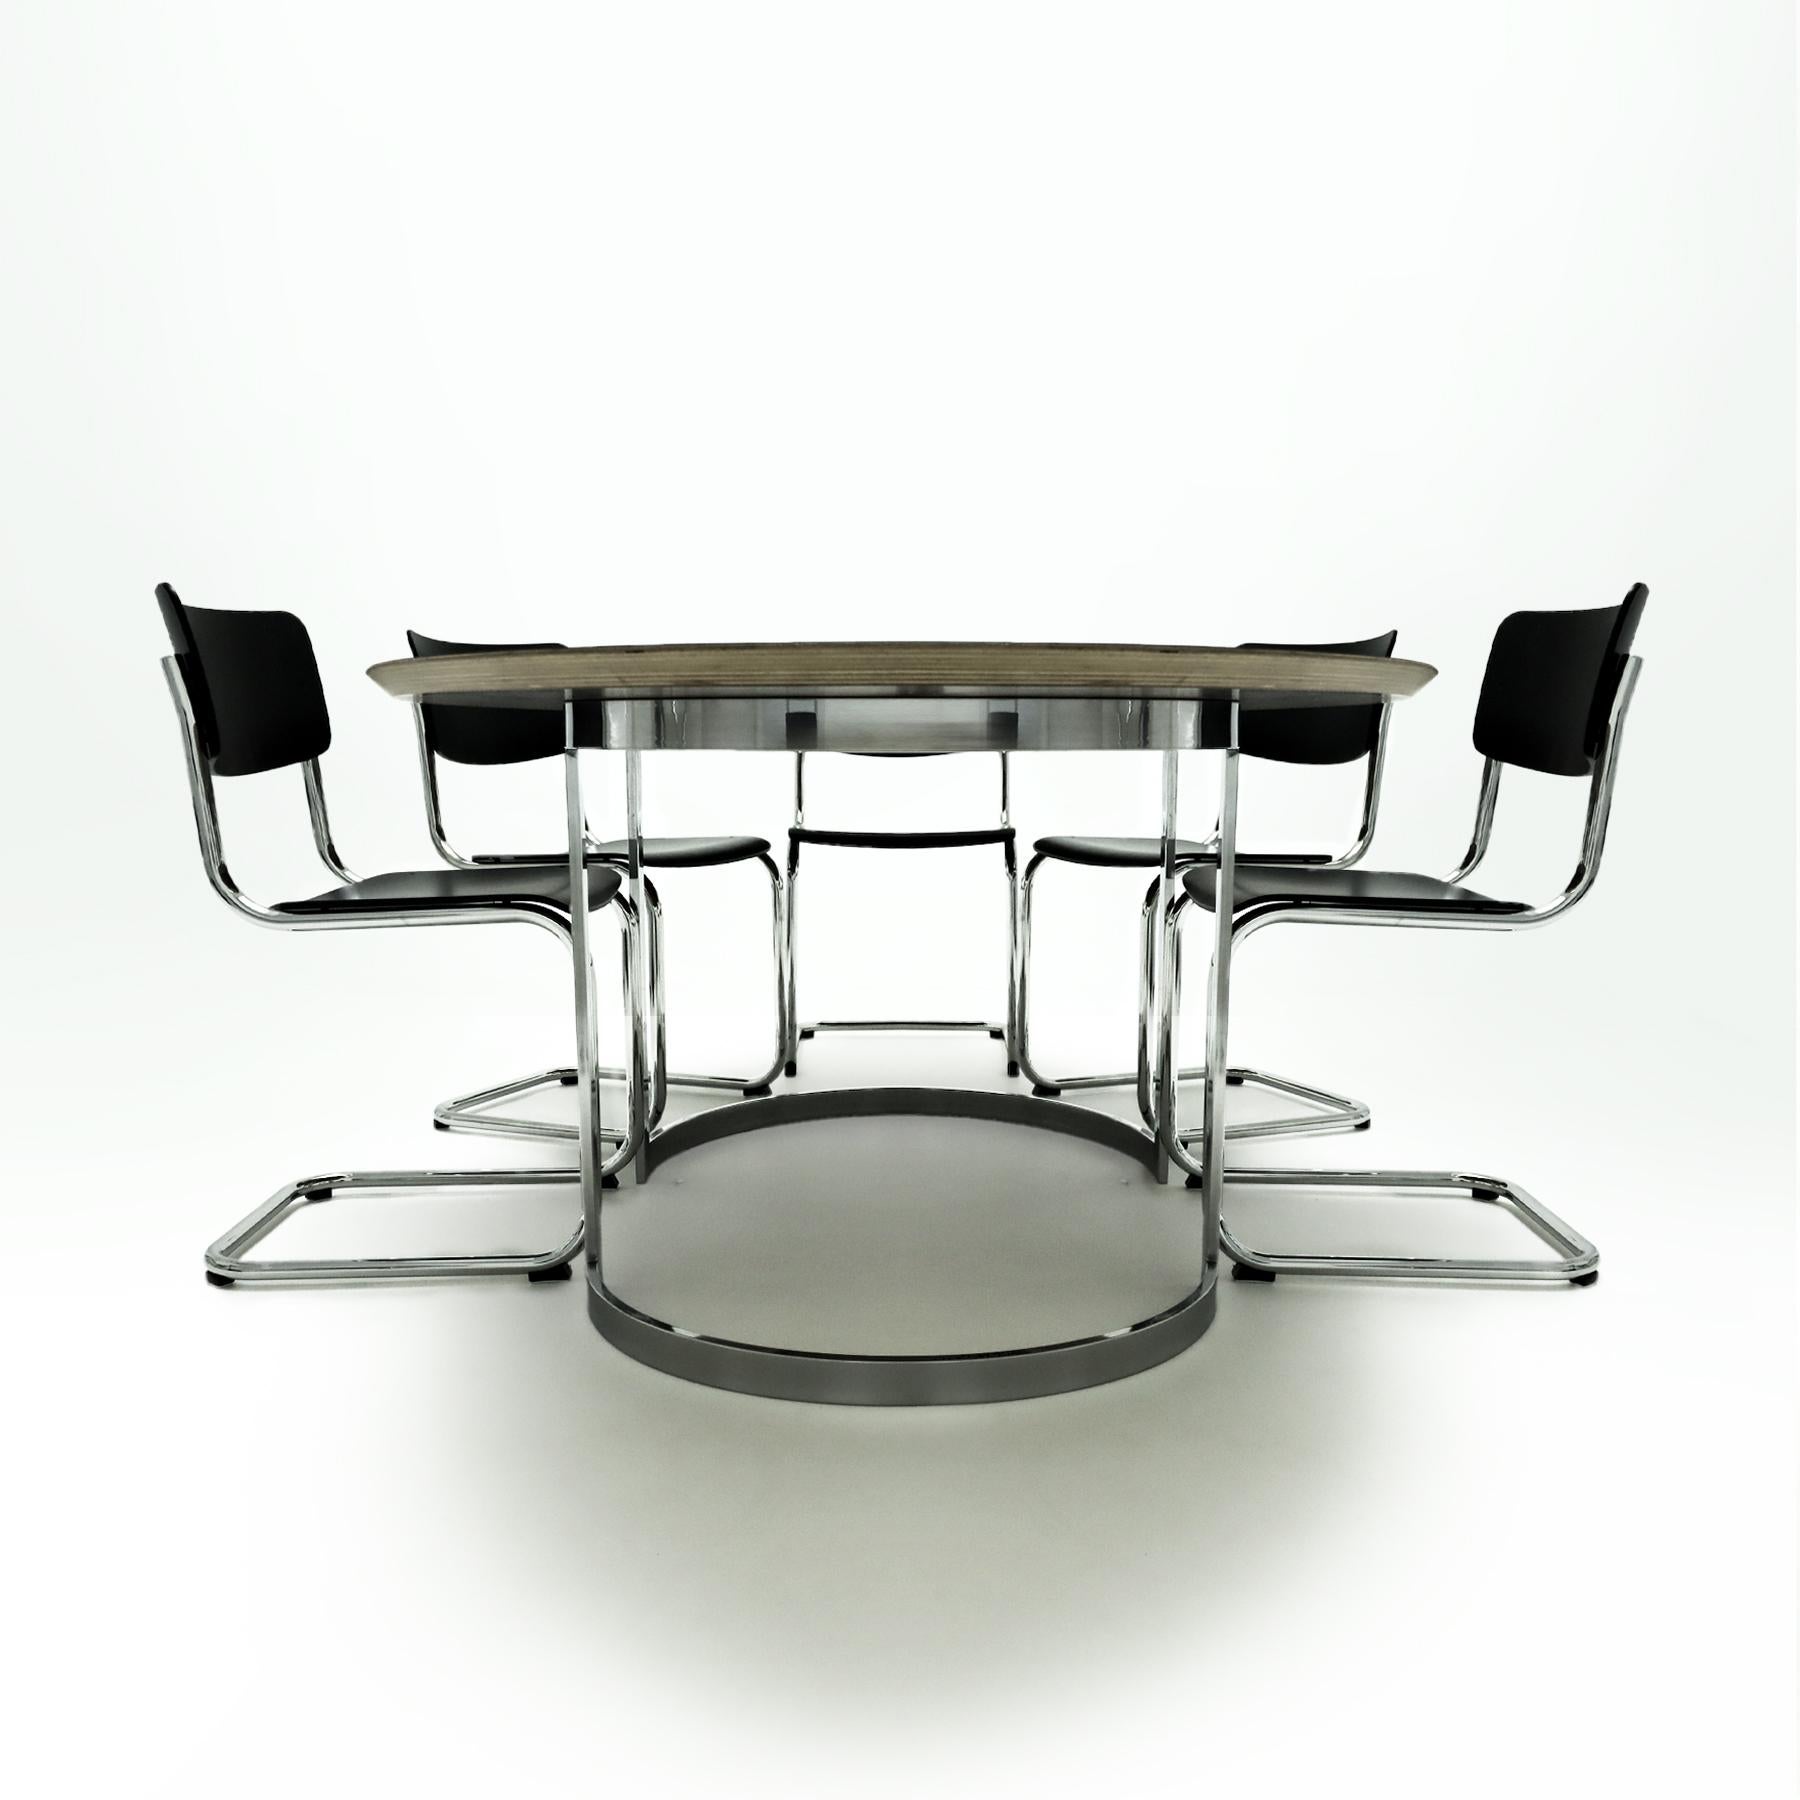 20th Century 8 Mart Stam Thonet S43 chairs matched to a large Milo Baughman style table  